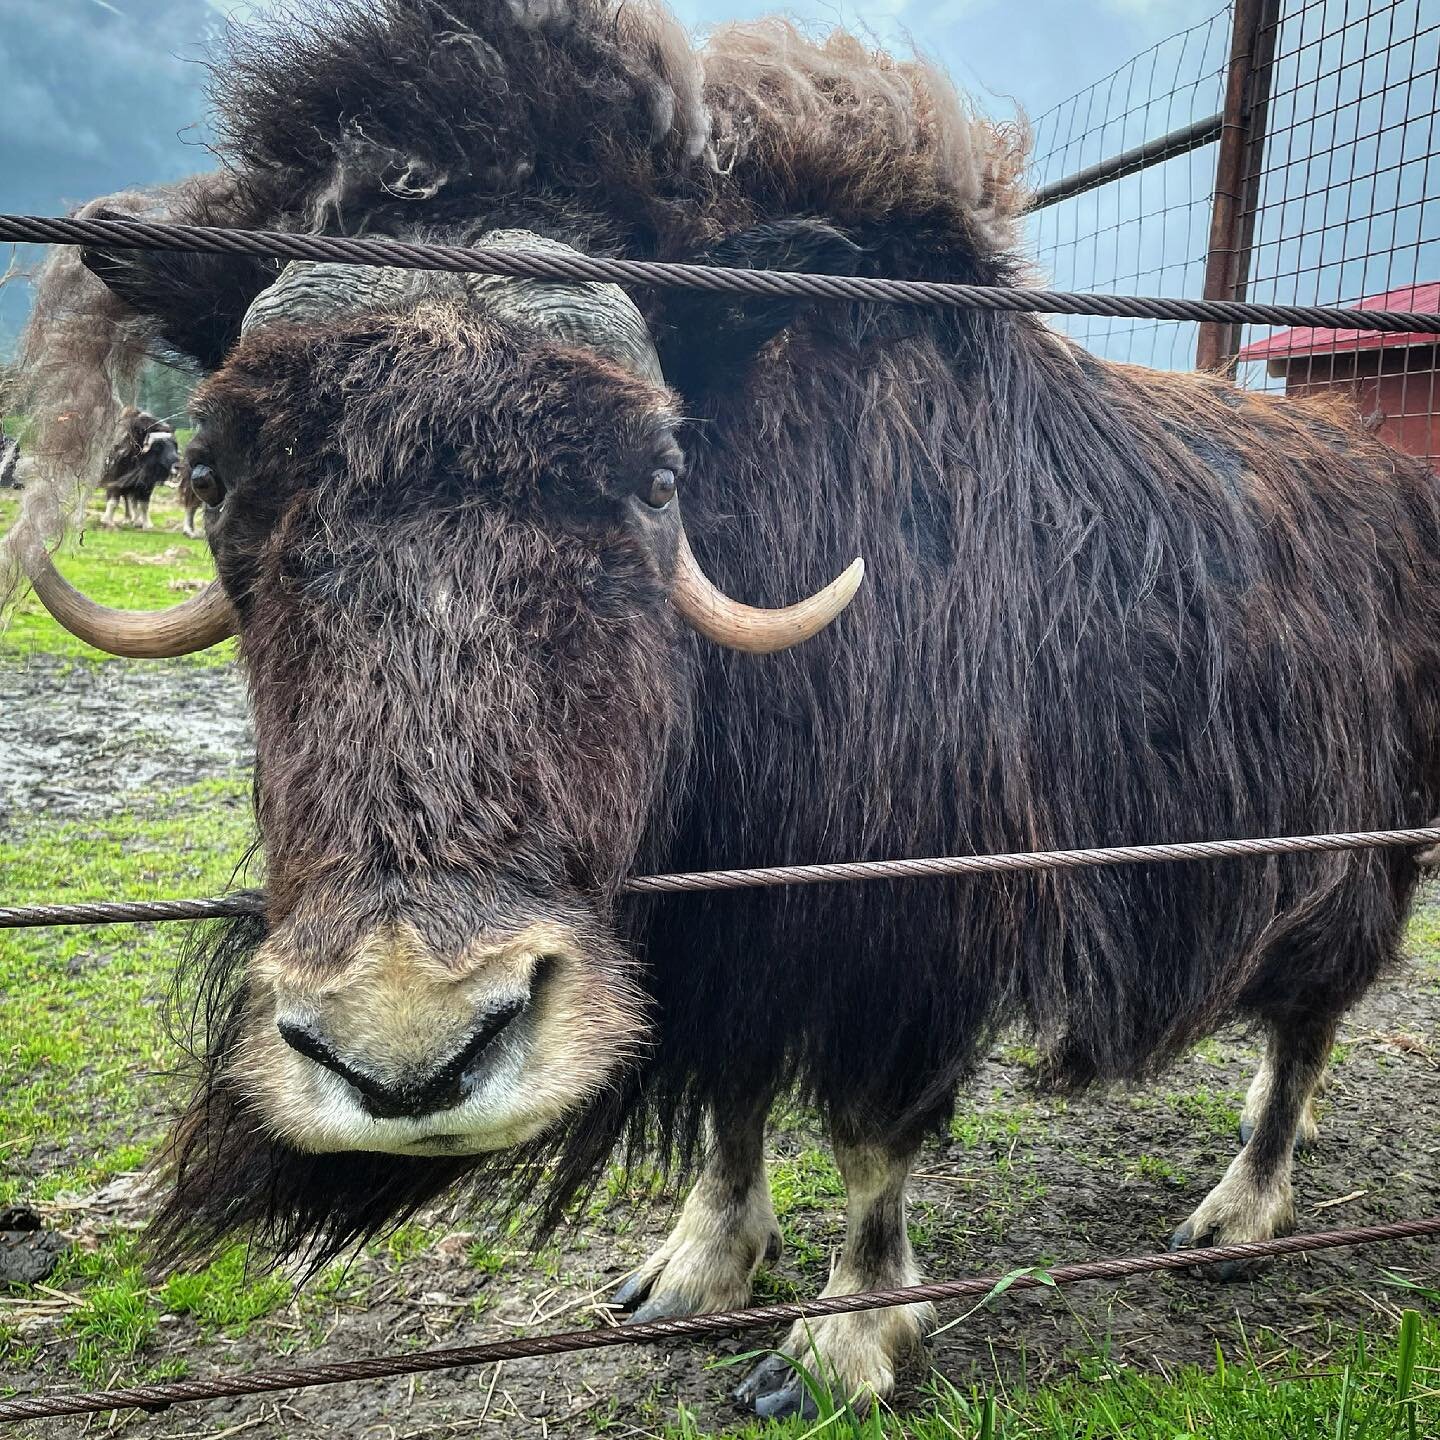 Spent a few hours at the Alaska Wildlife Conservation Center.  I was really felt a bond with this musk ox.